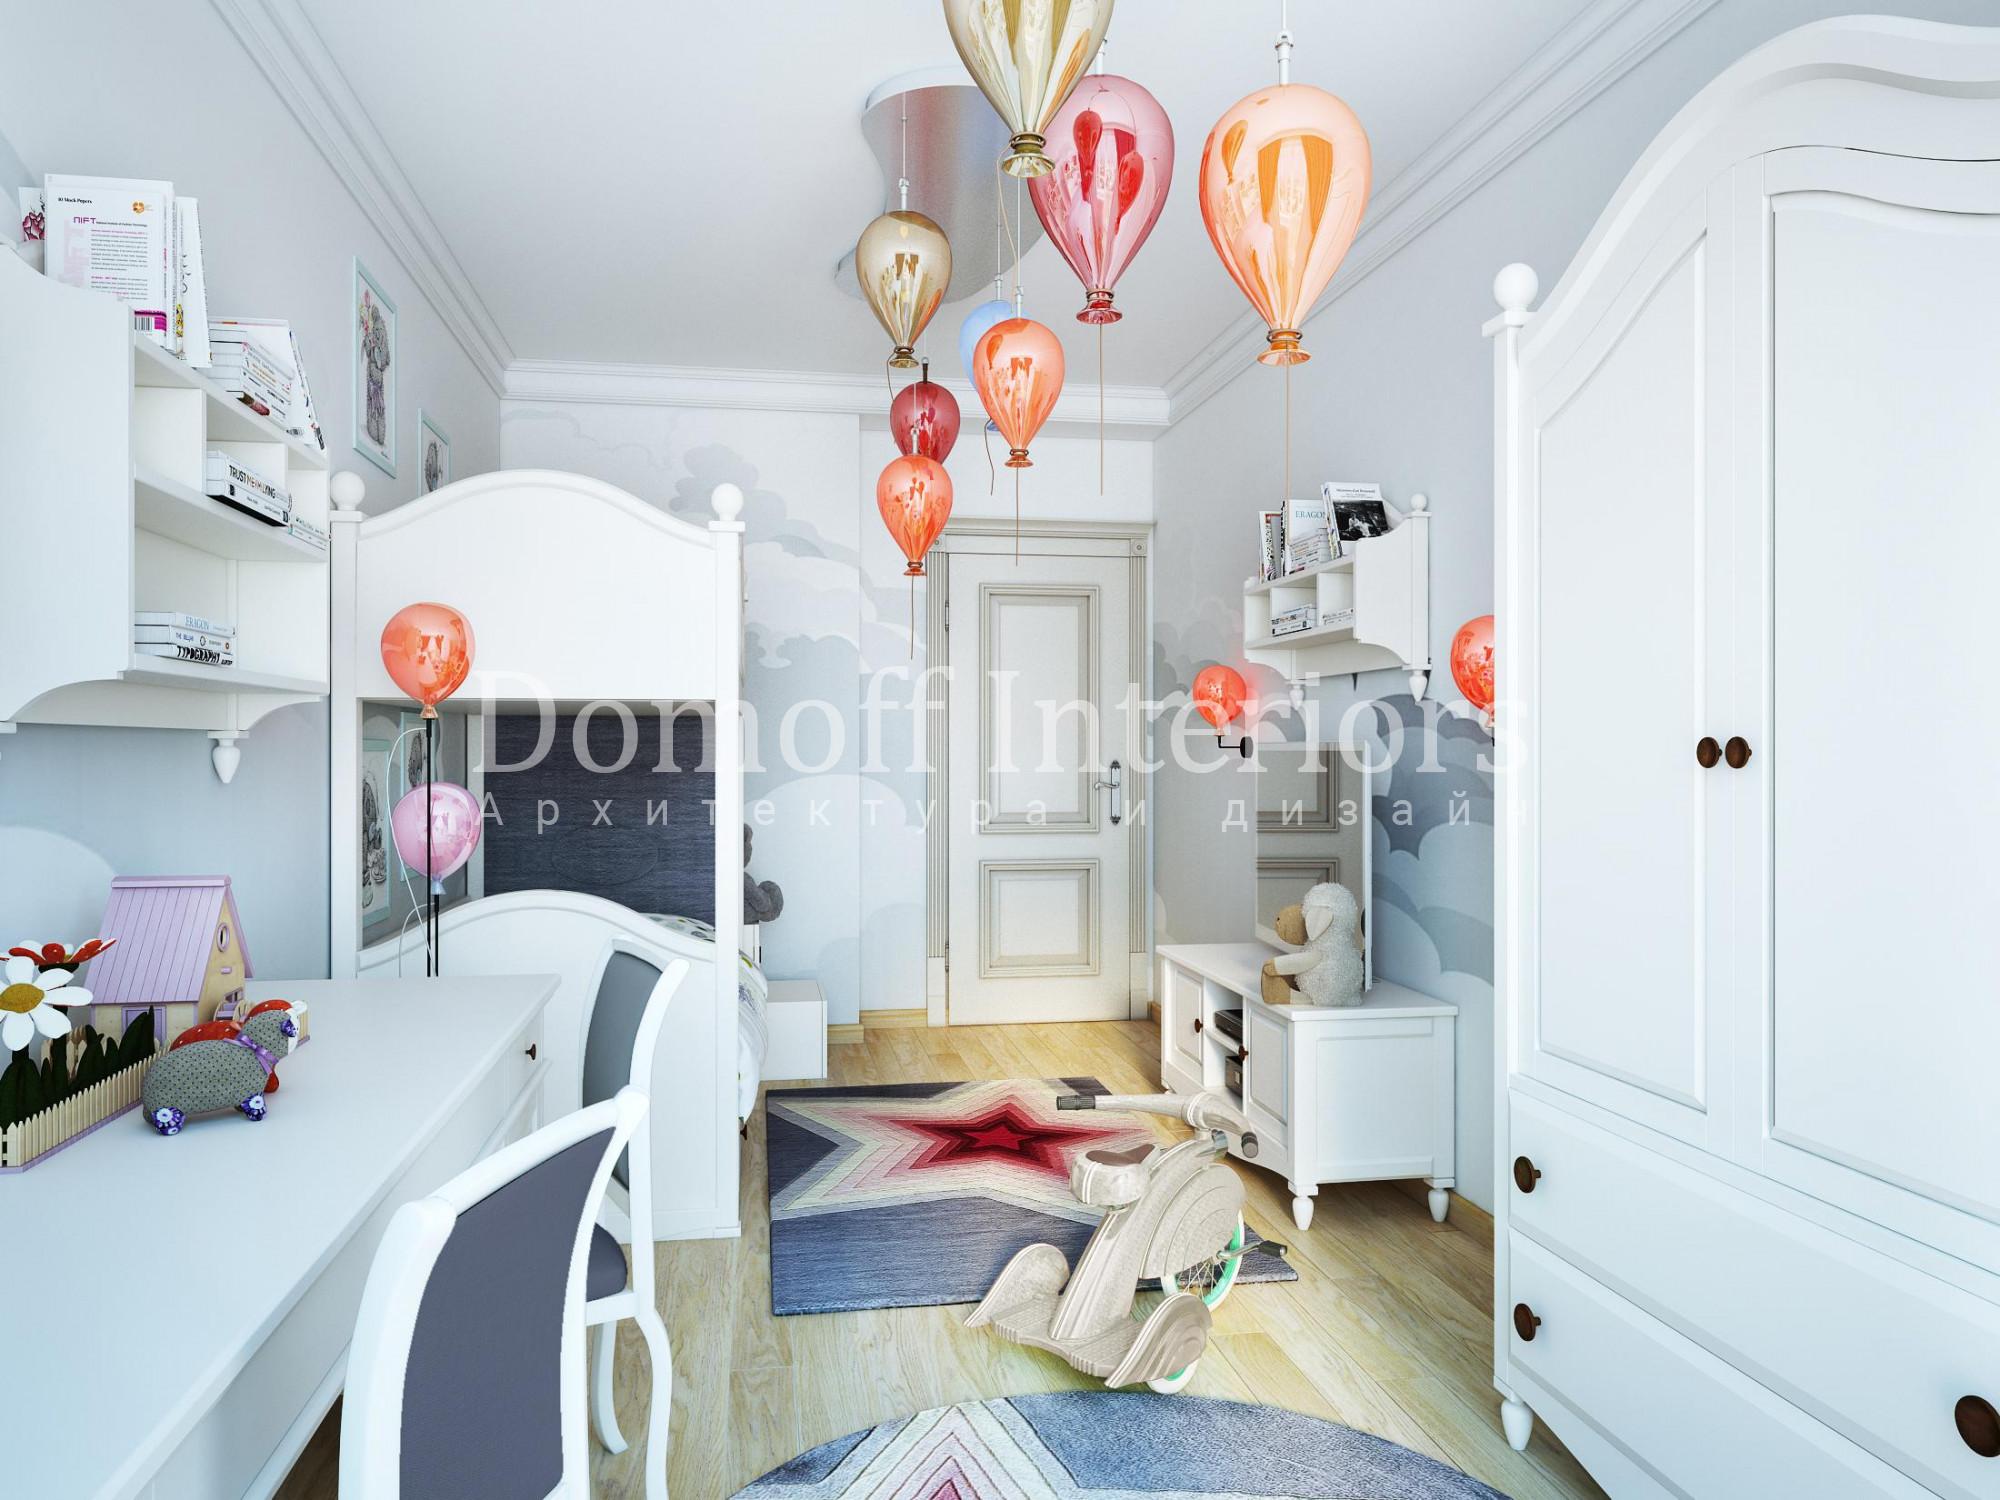 Nursery made in the style of Contemporary classics